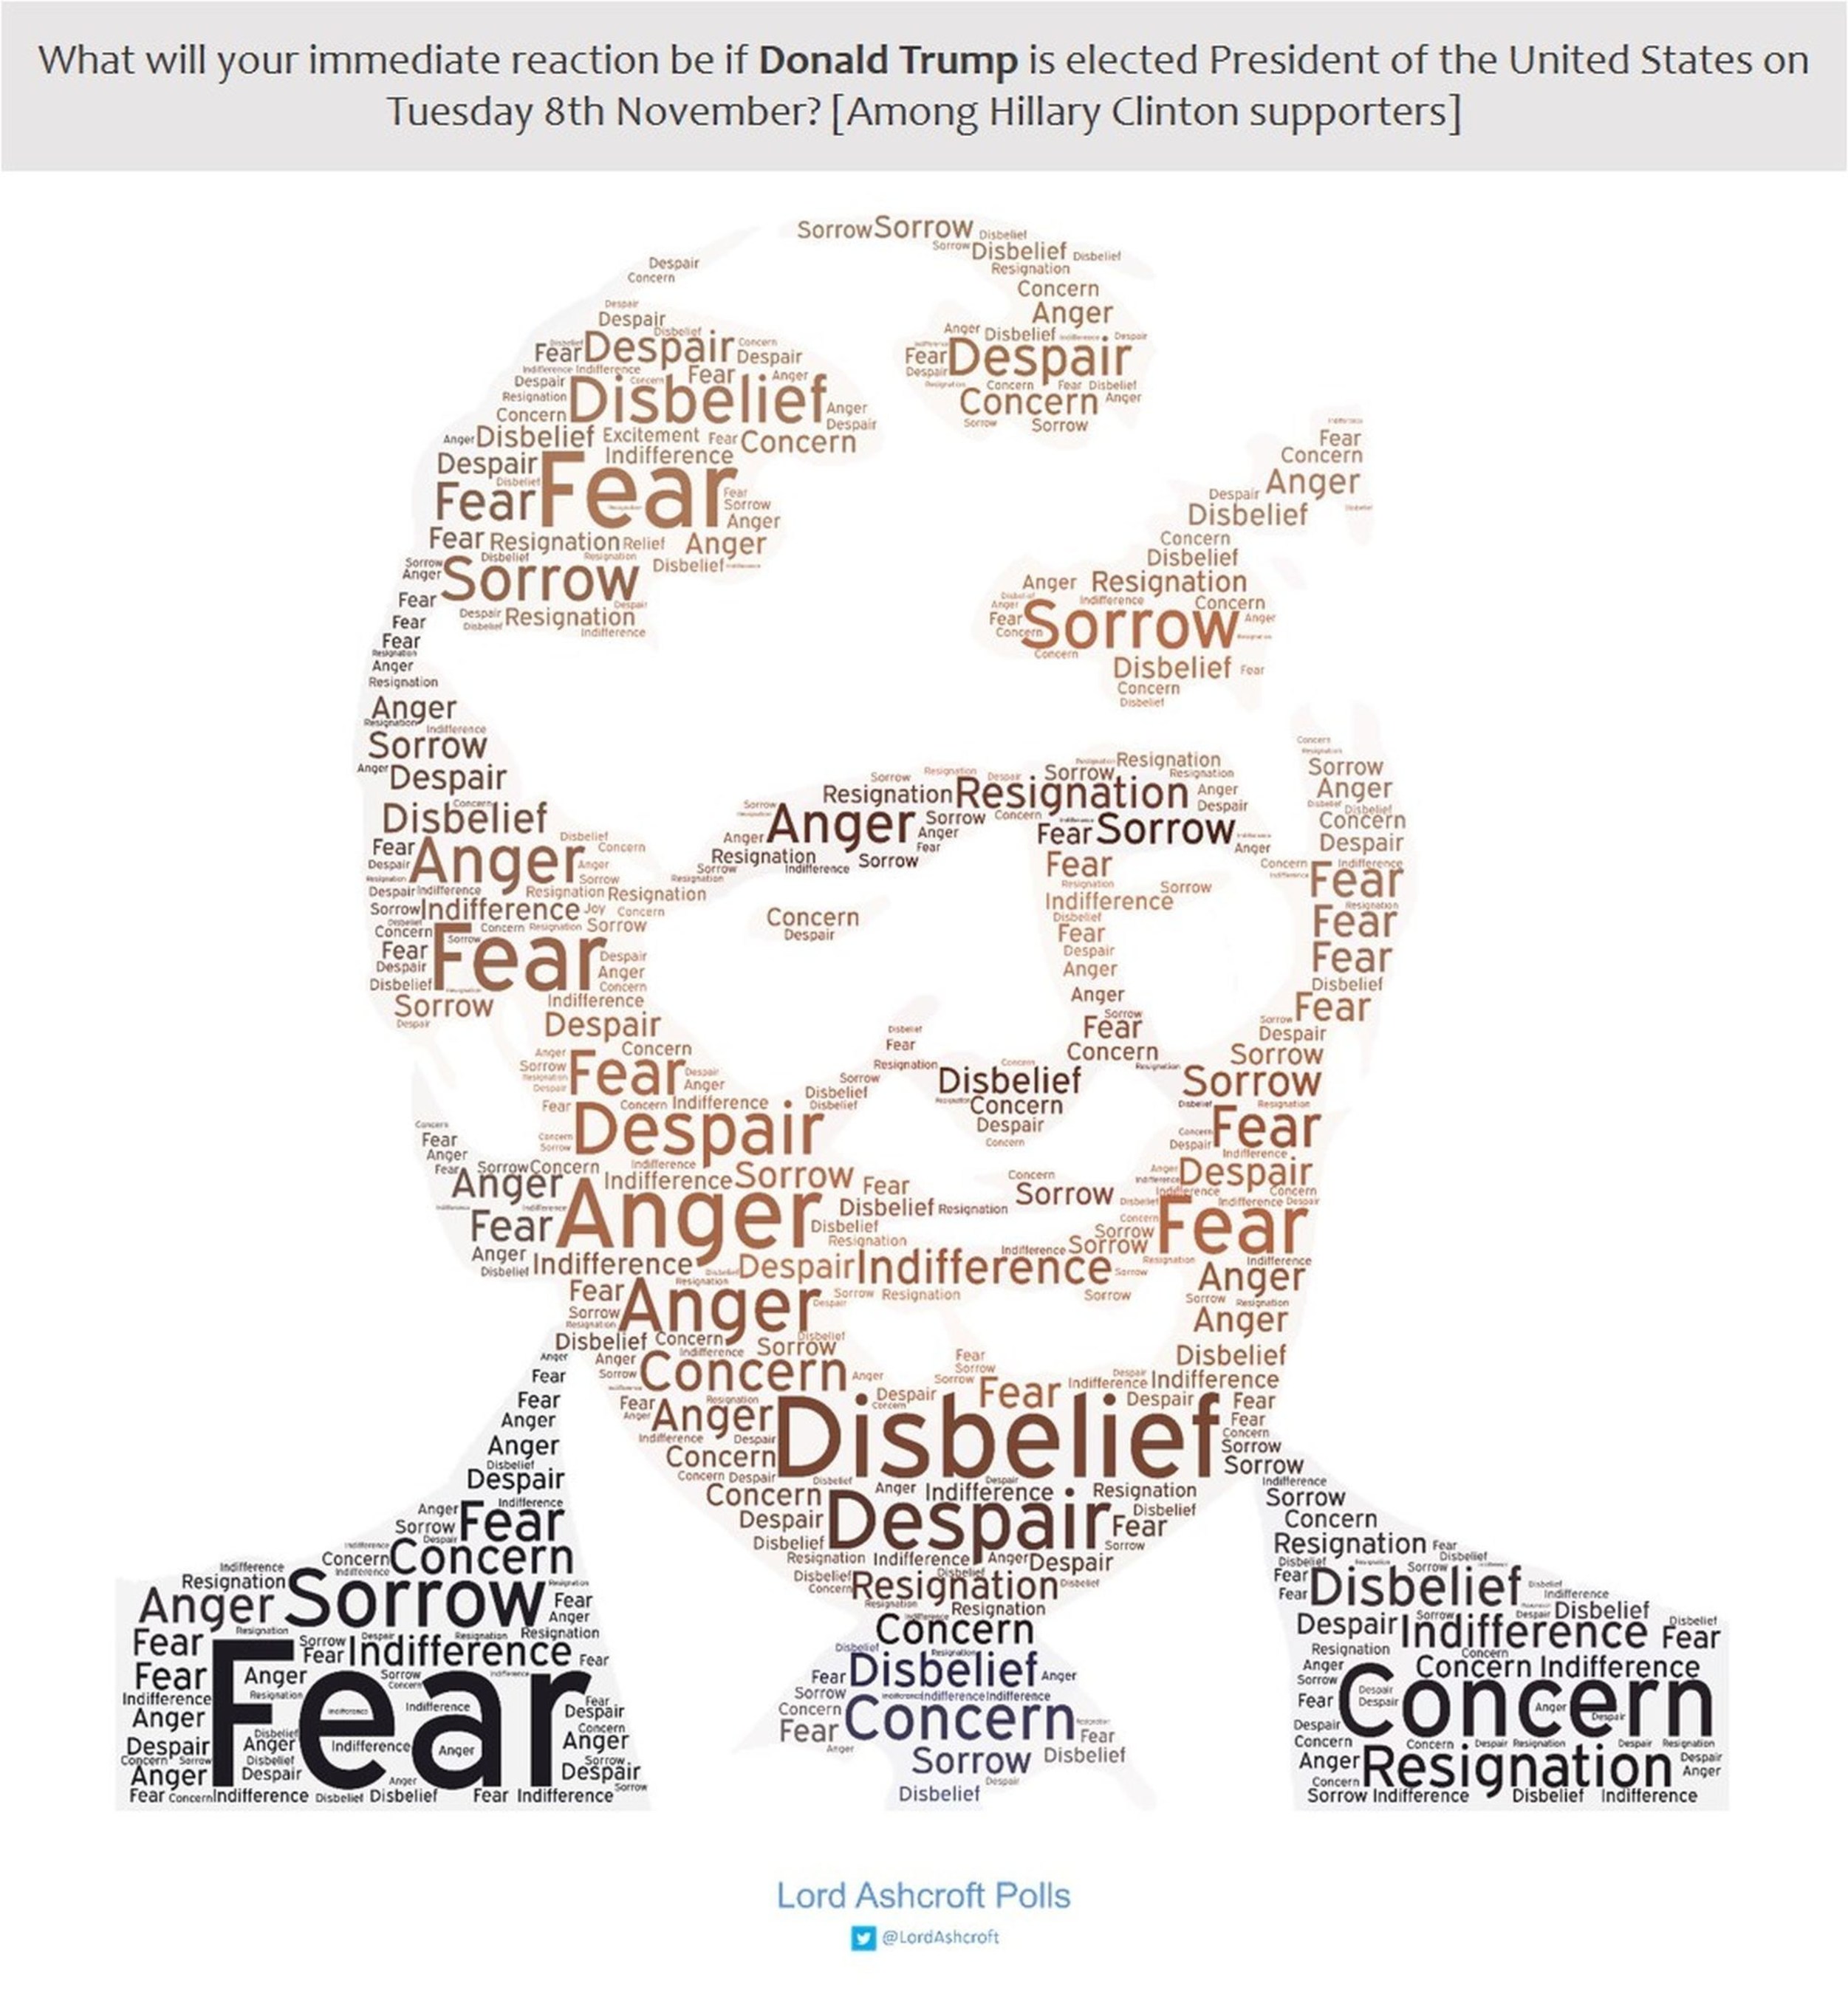 Words chosen by Clinton voters to describe how they would feel if Trump were to win (PRNewsFoto/lordashcroftpolls.com)